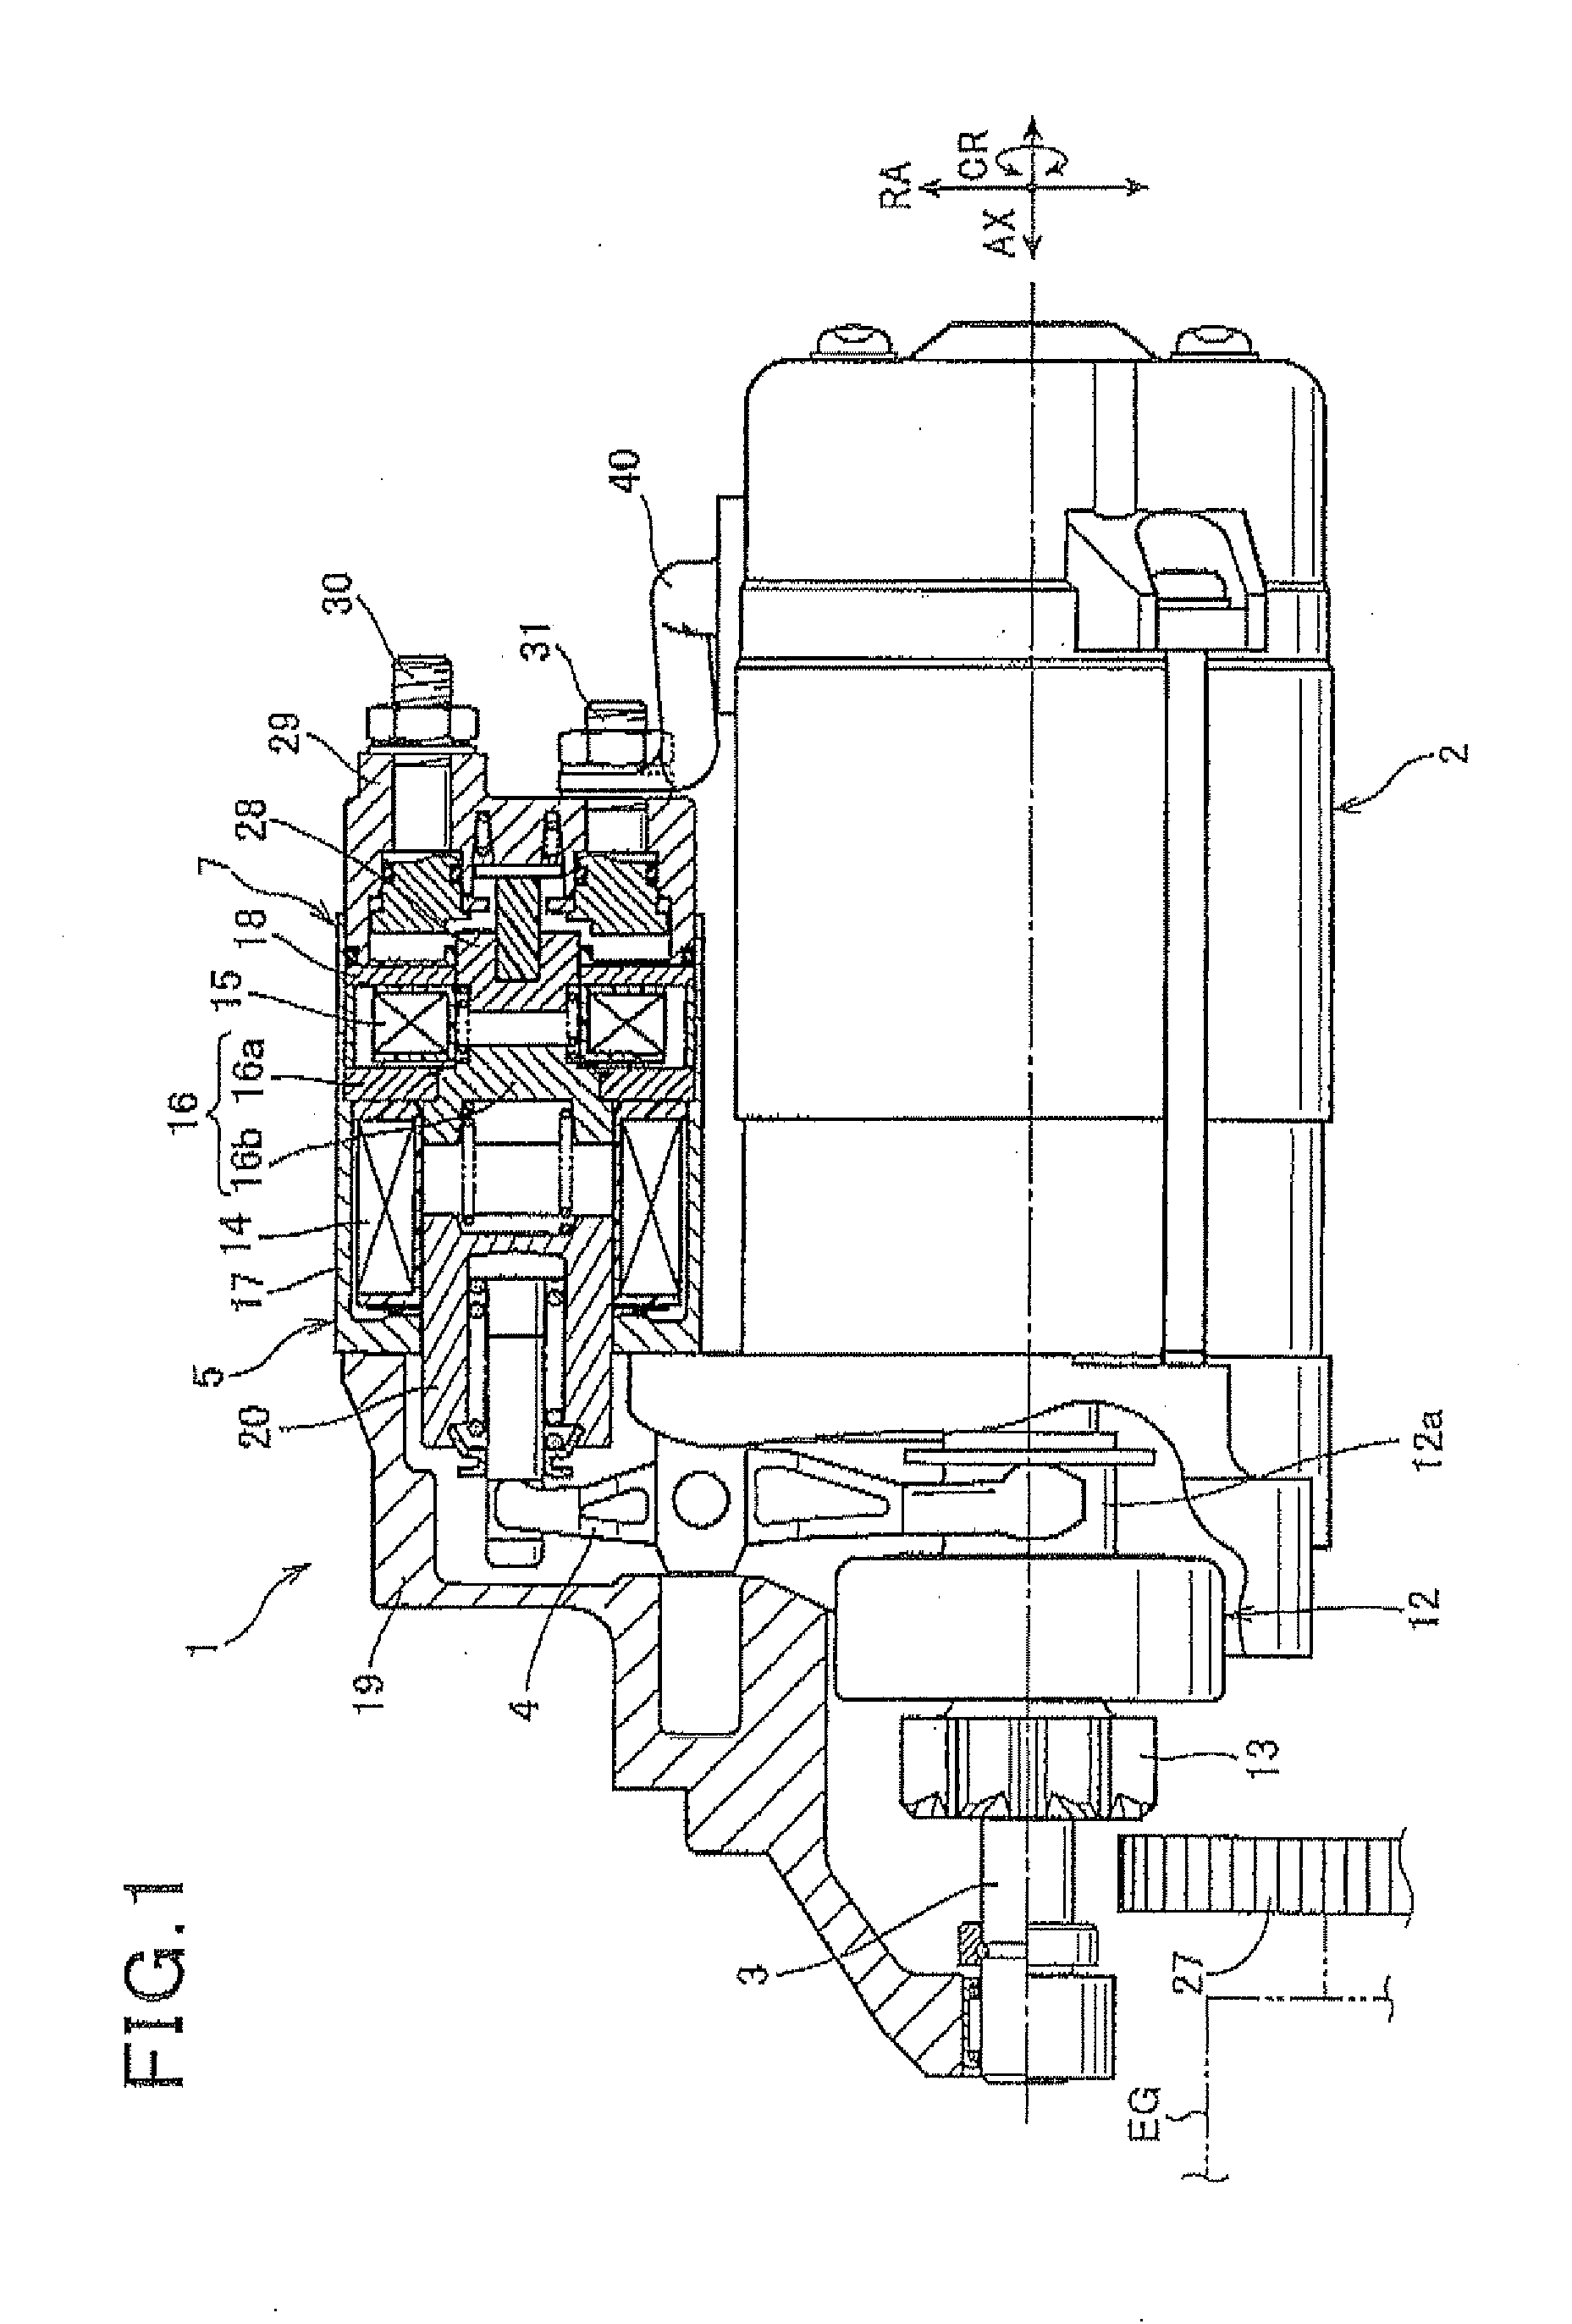 Apparatus for starting engine mounted on-vehicle